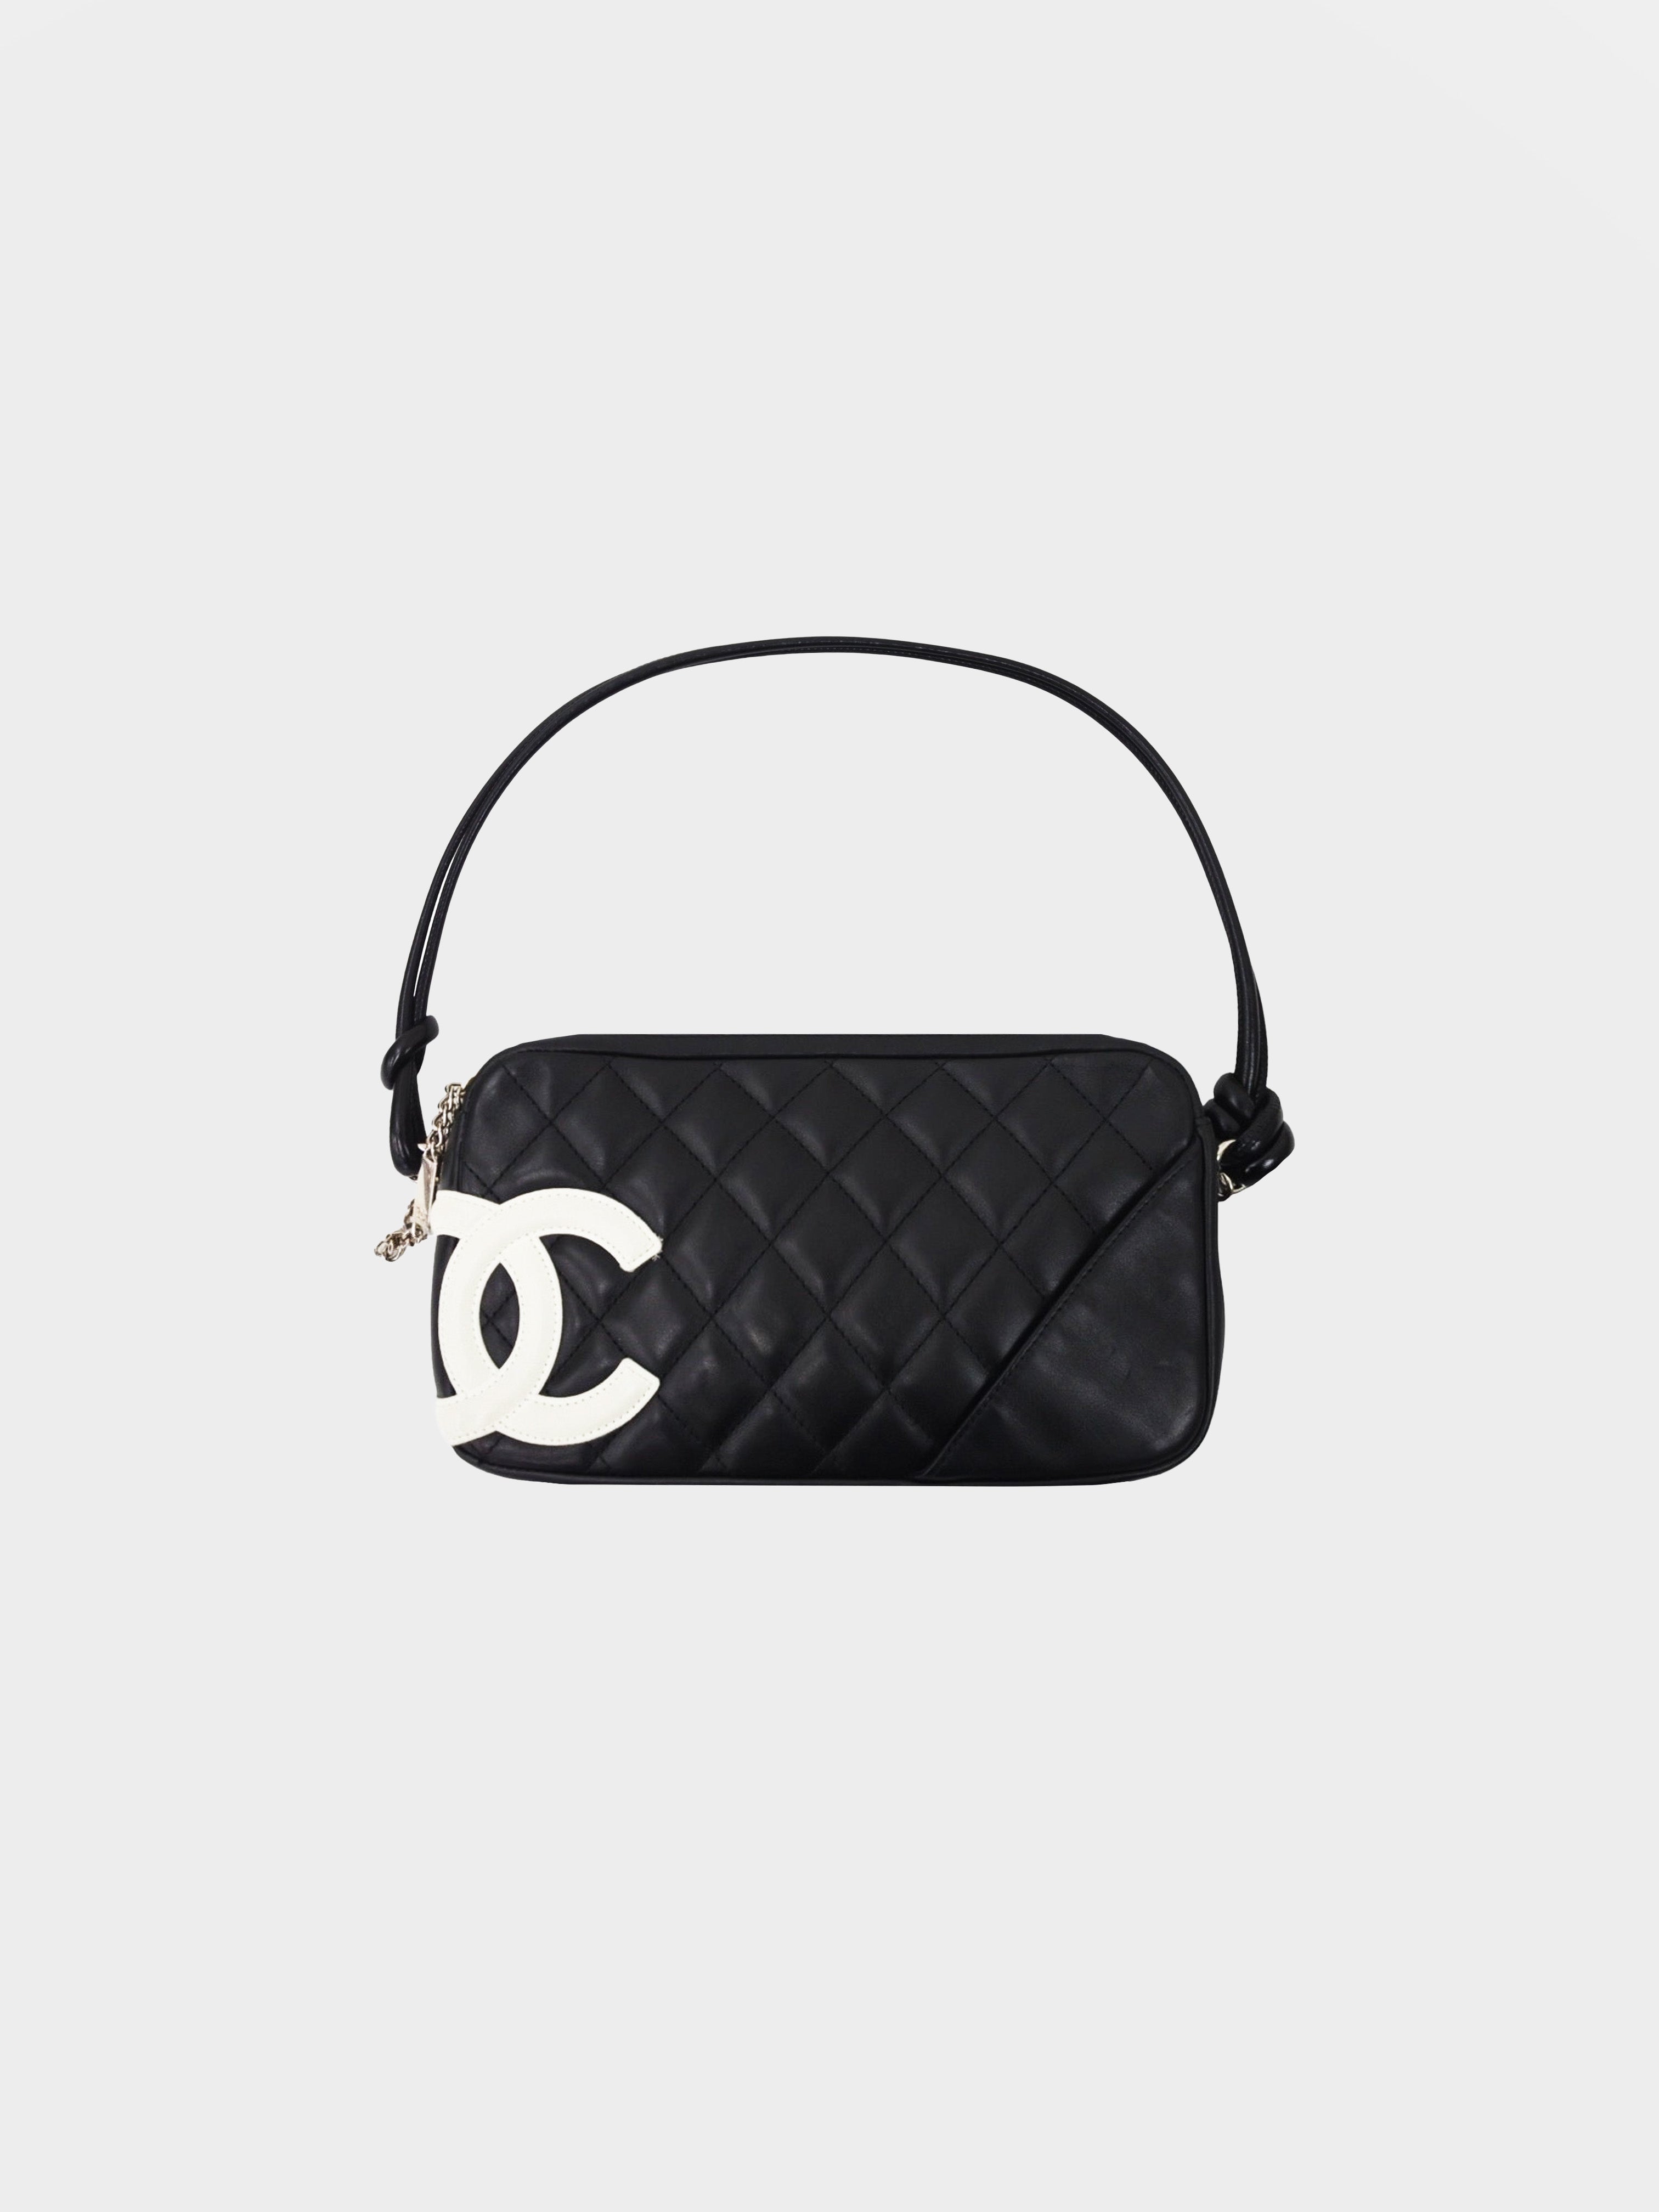 Chanel Pink/Black Quilted Leather Cambon Ligne Bag Chanel